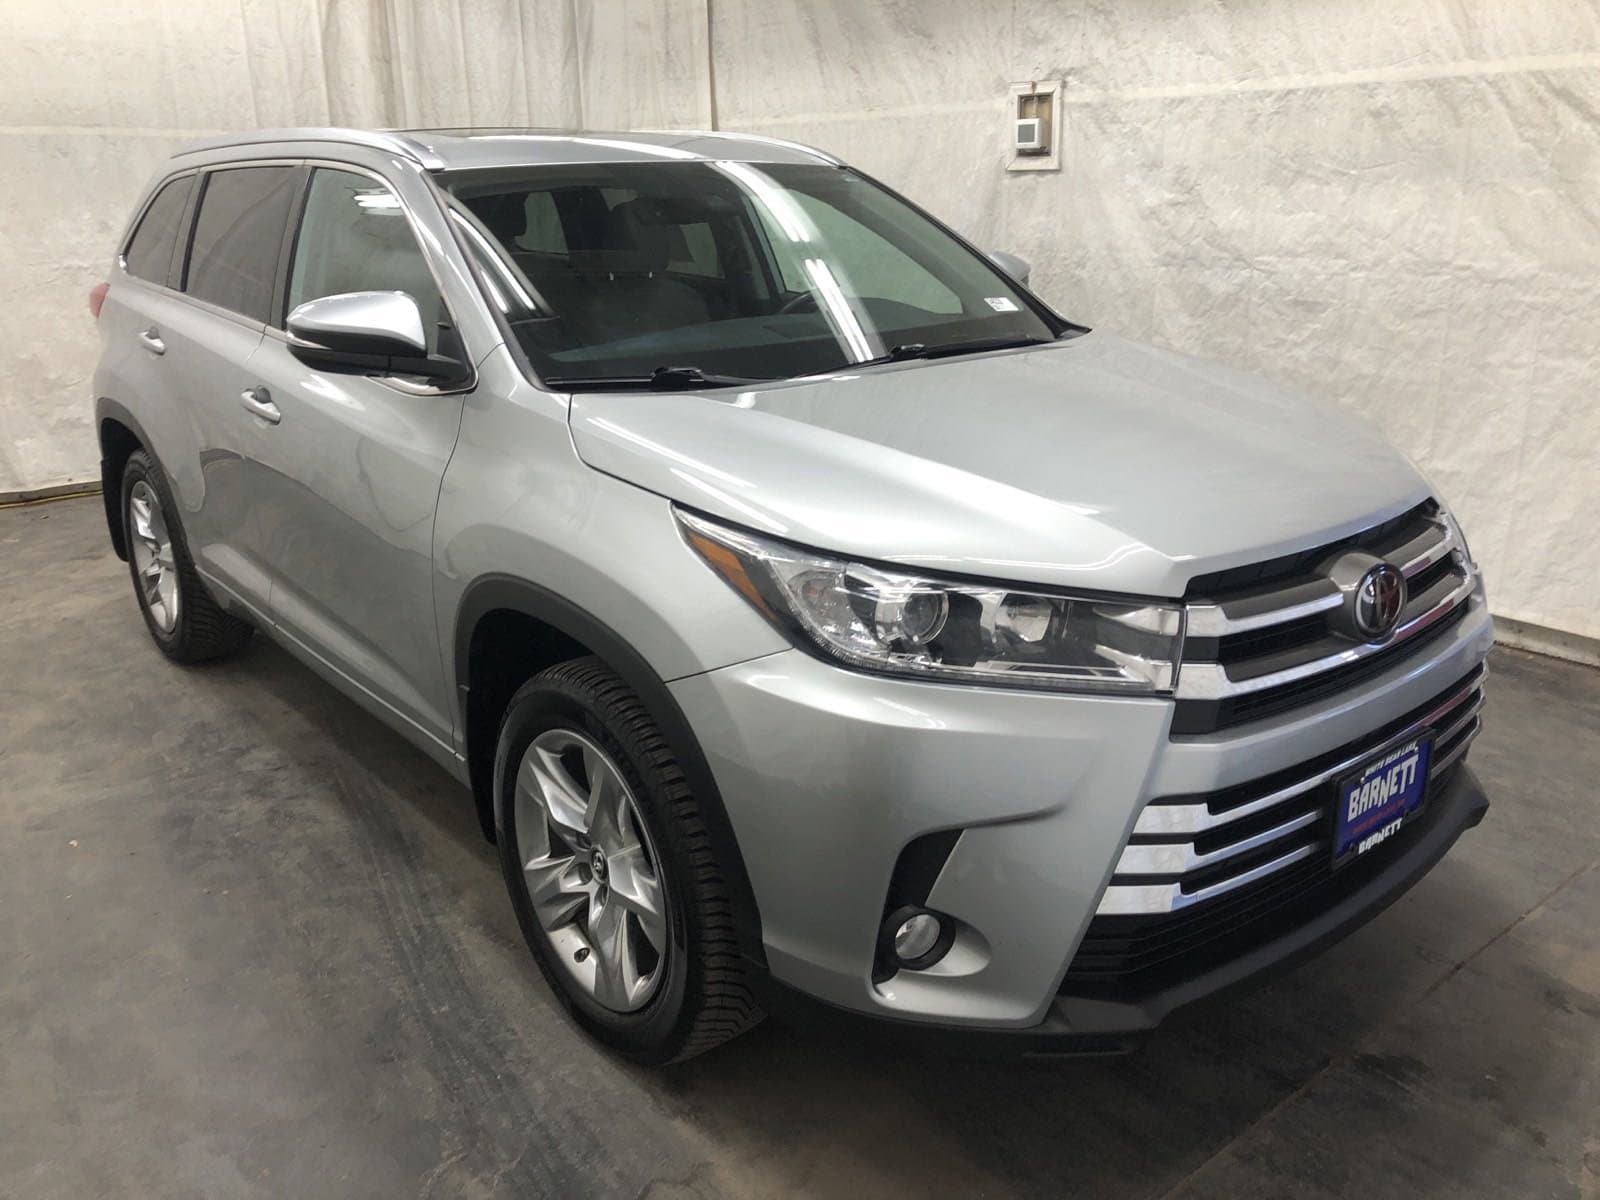 Used 2018 Toyota Highlander Limited with VIN 5TDDZRFHXJS888537 for sale in White Bear Lake, Minnesota